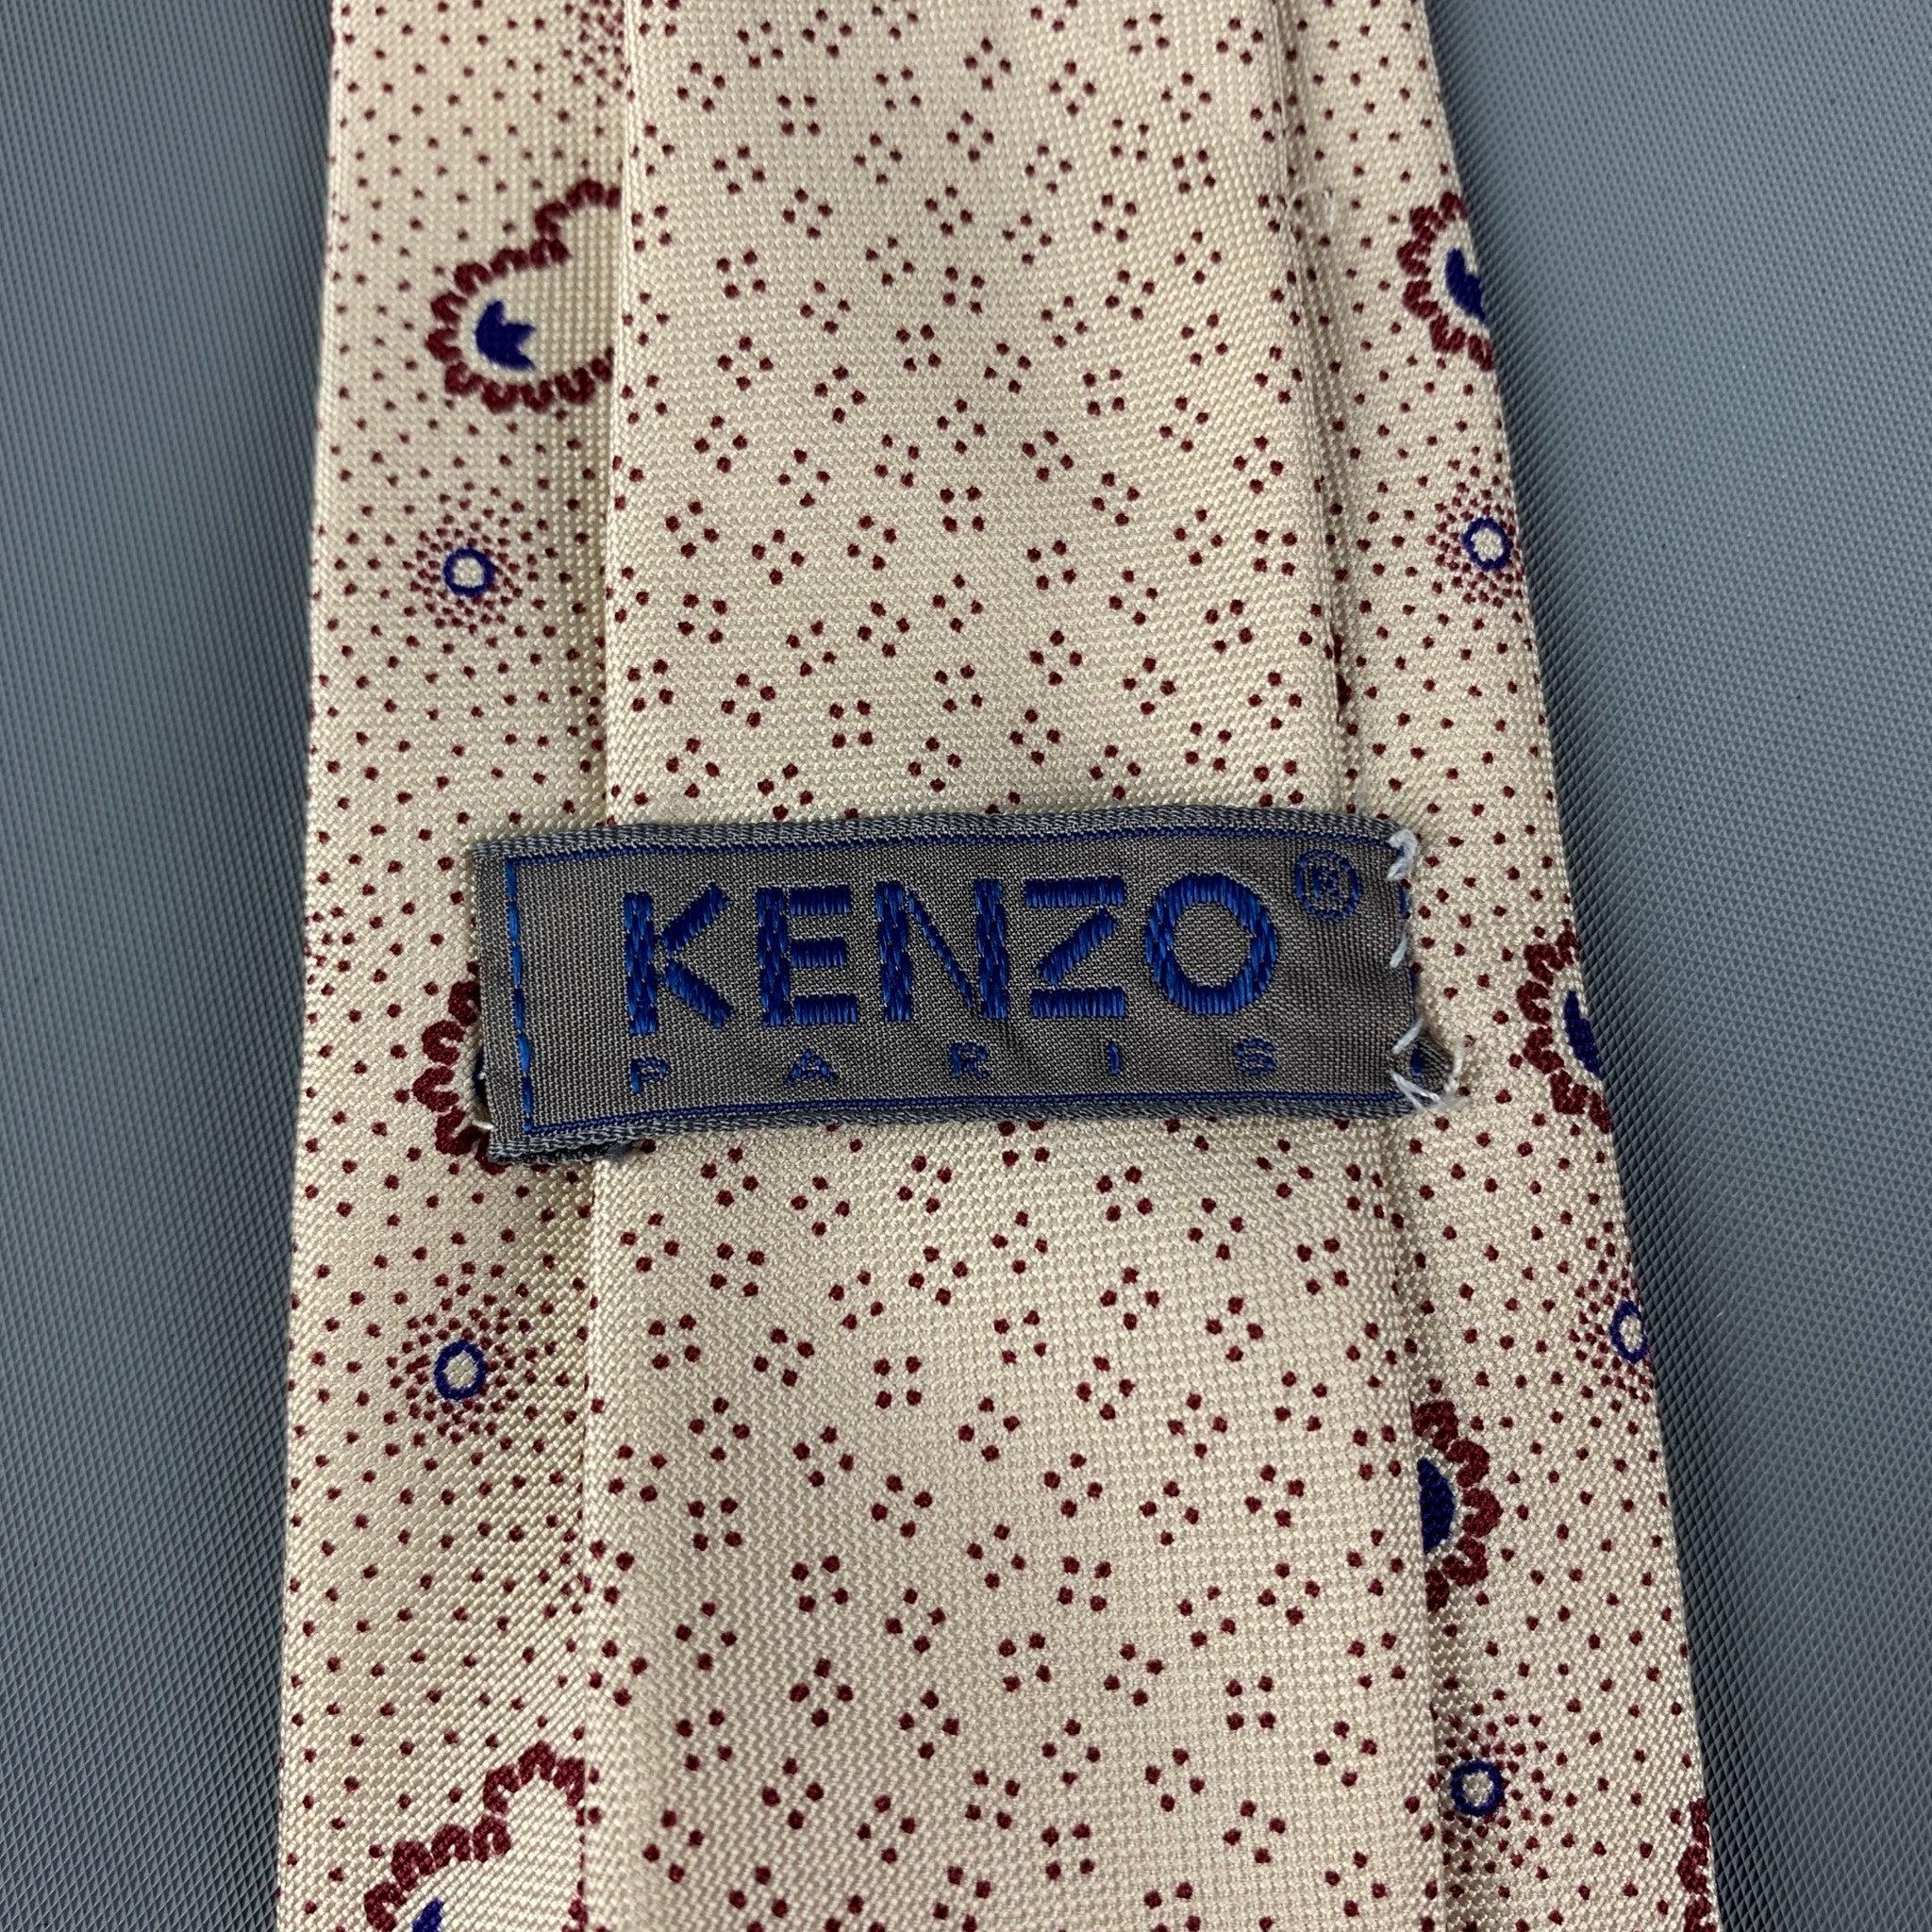 KENZO Cream Burgundy Dots Tie In Good Condition For Sale In San Francisco, CA